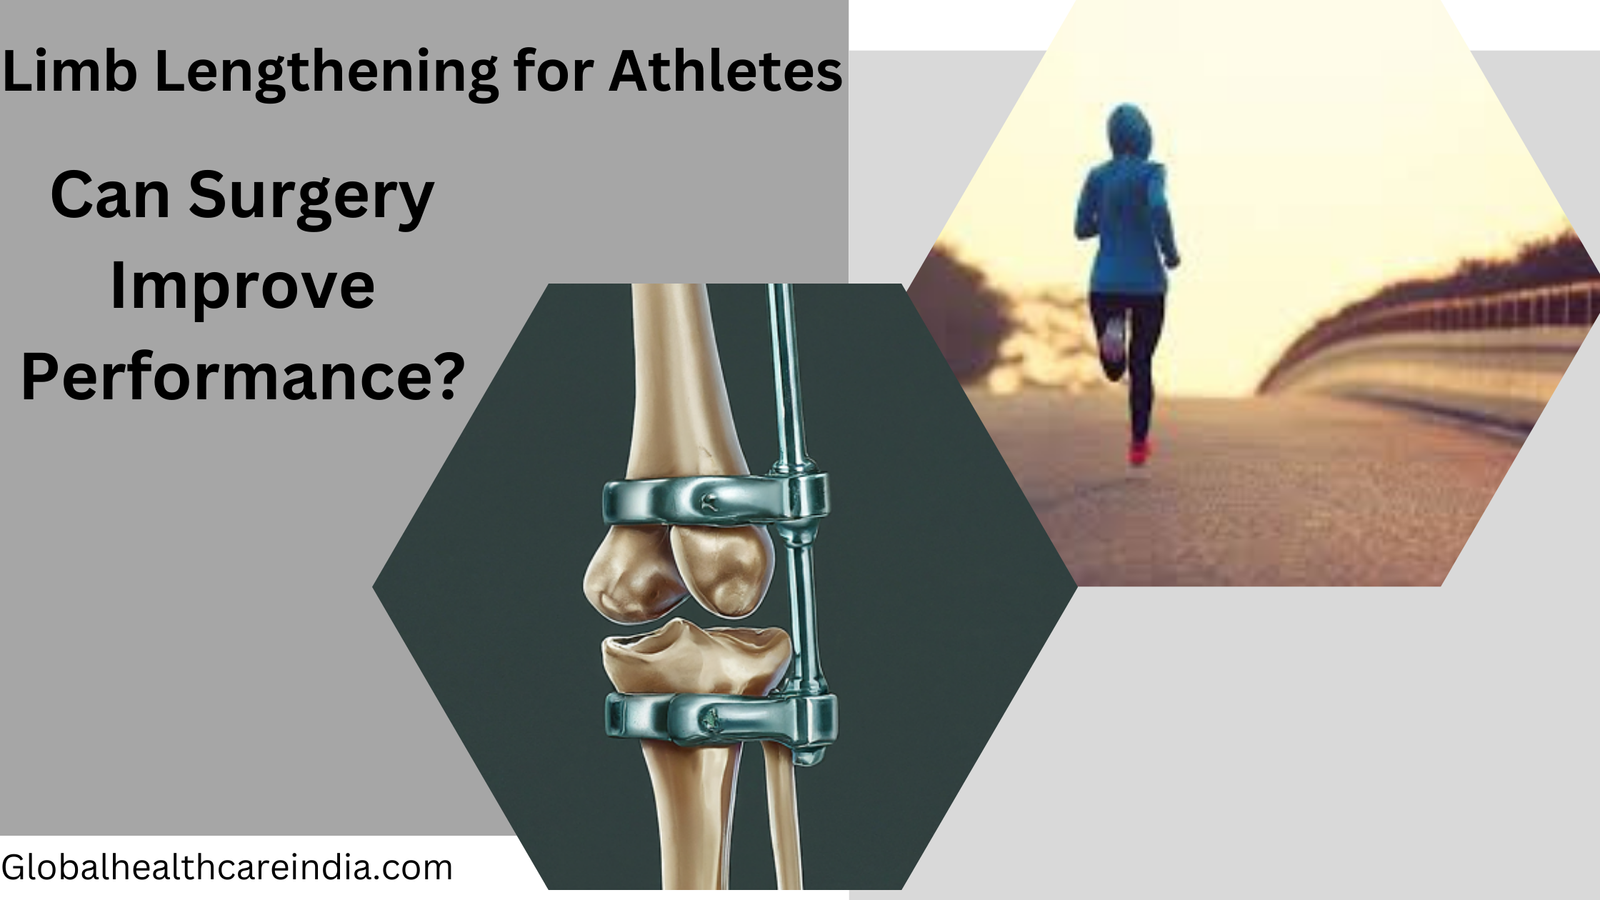 Limb Lengthening for Athletes Can Surgery Improve Performance